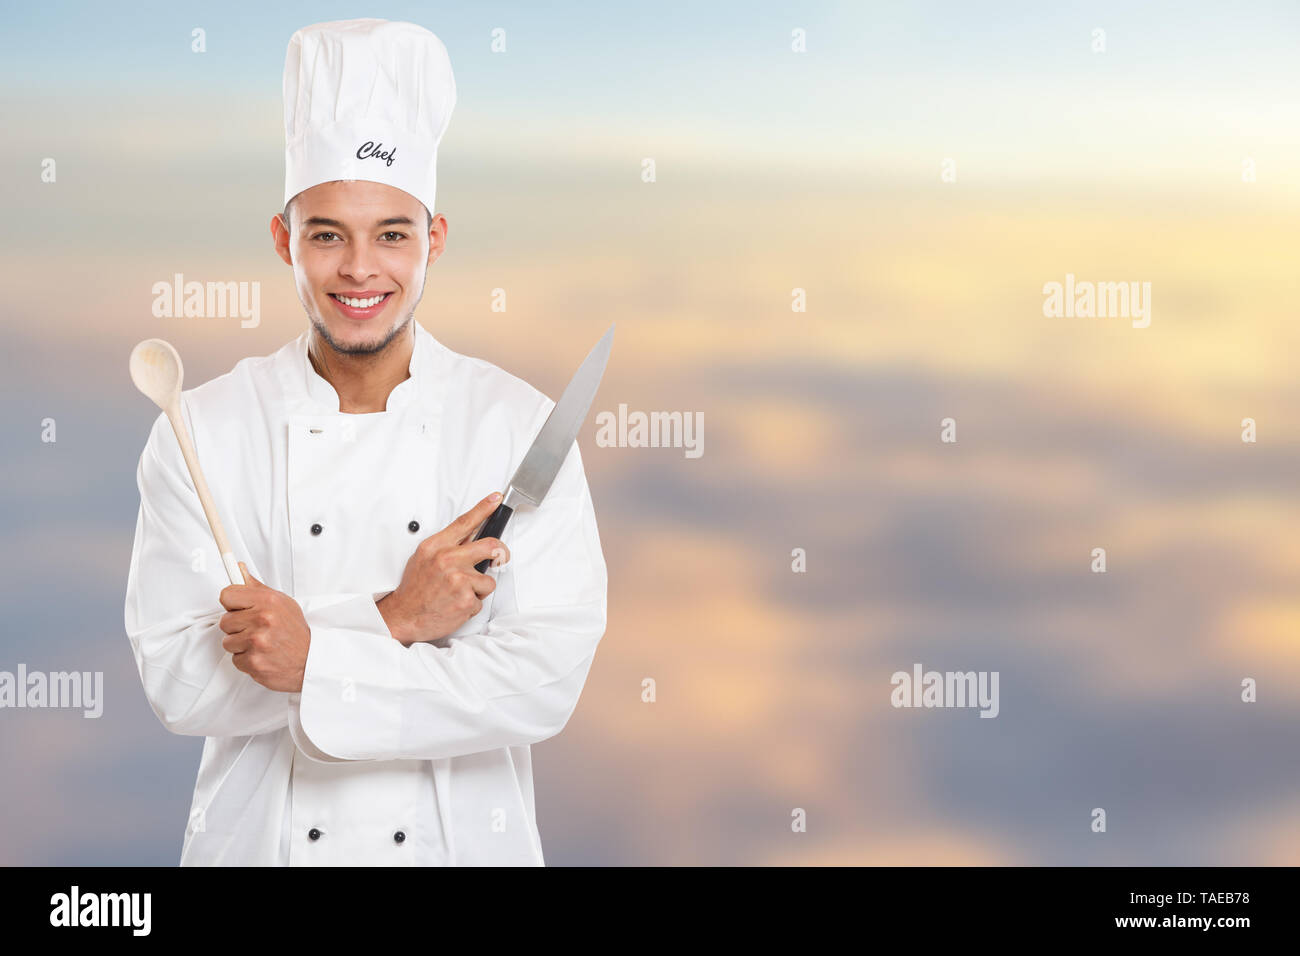 Cook cooking education training young man male job copyspace copy space outdoors Stock Photo